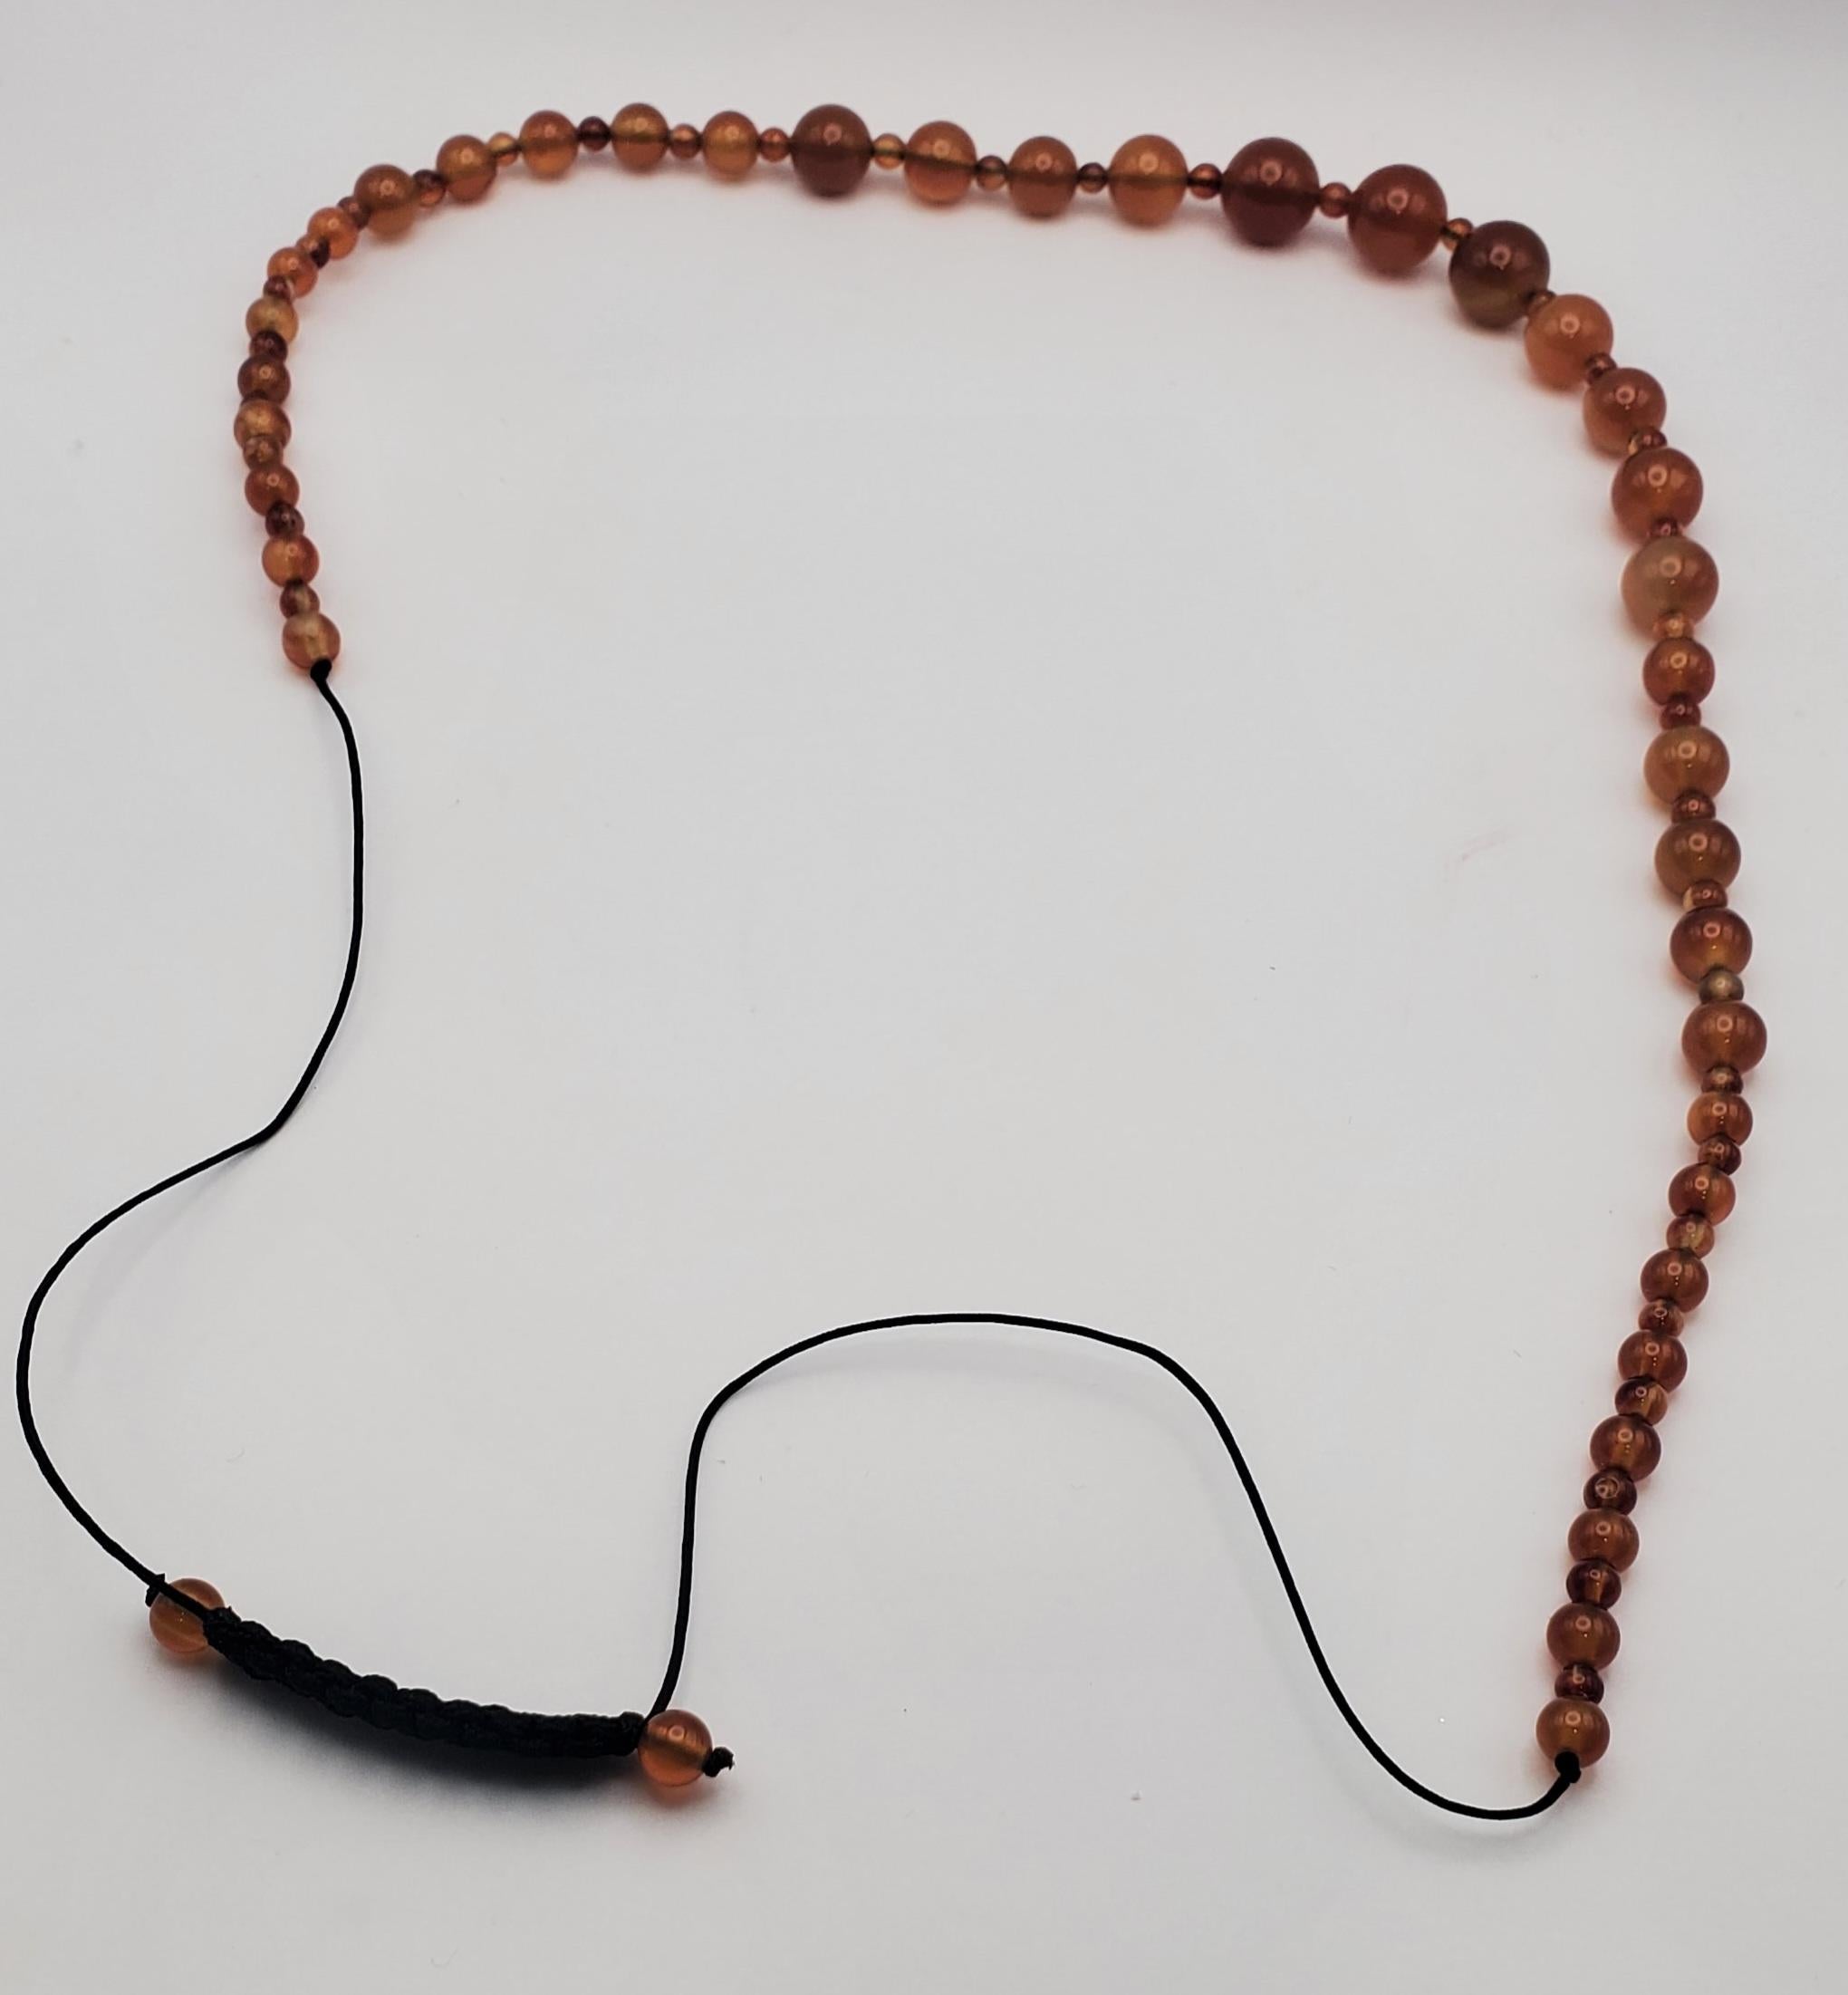 Beautiful vintage natural carnelian round bead necklace. This necklace is continuous with no clasp and finished with a sliding square knot design. This allows the necklace to be extended from 19